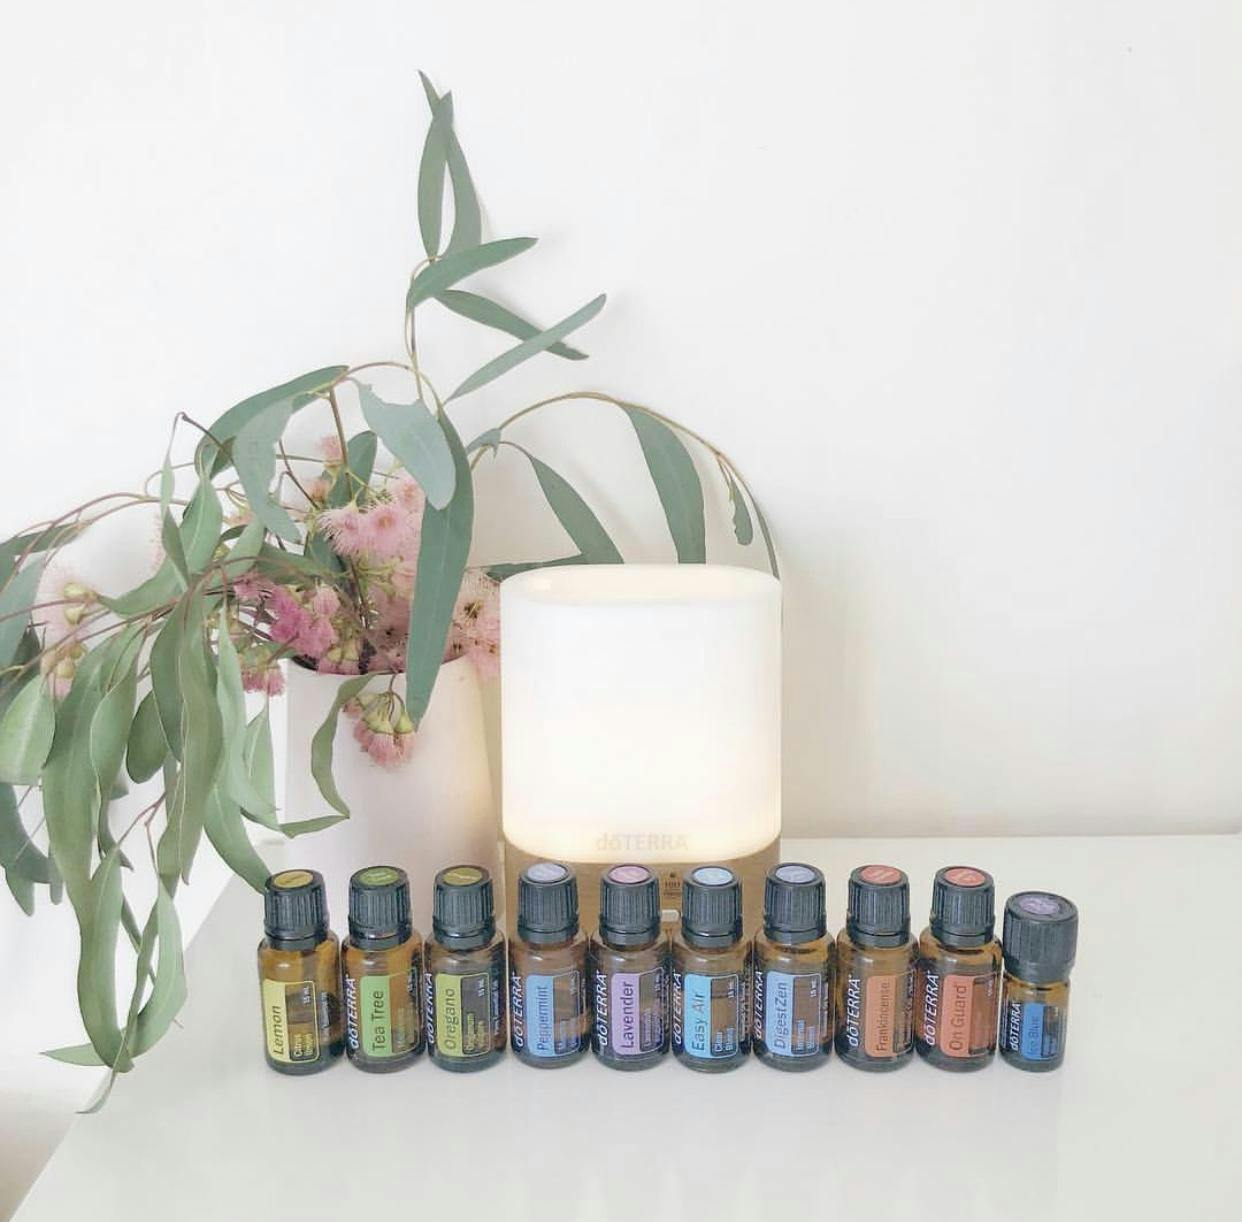 Introduction to Essential Oils Workshop